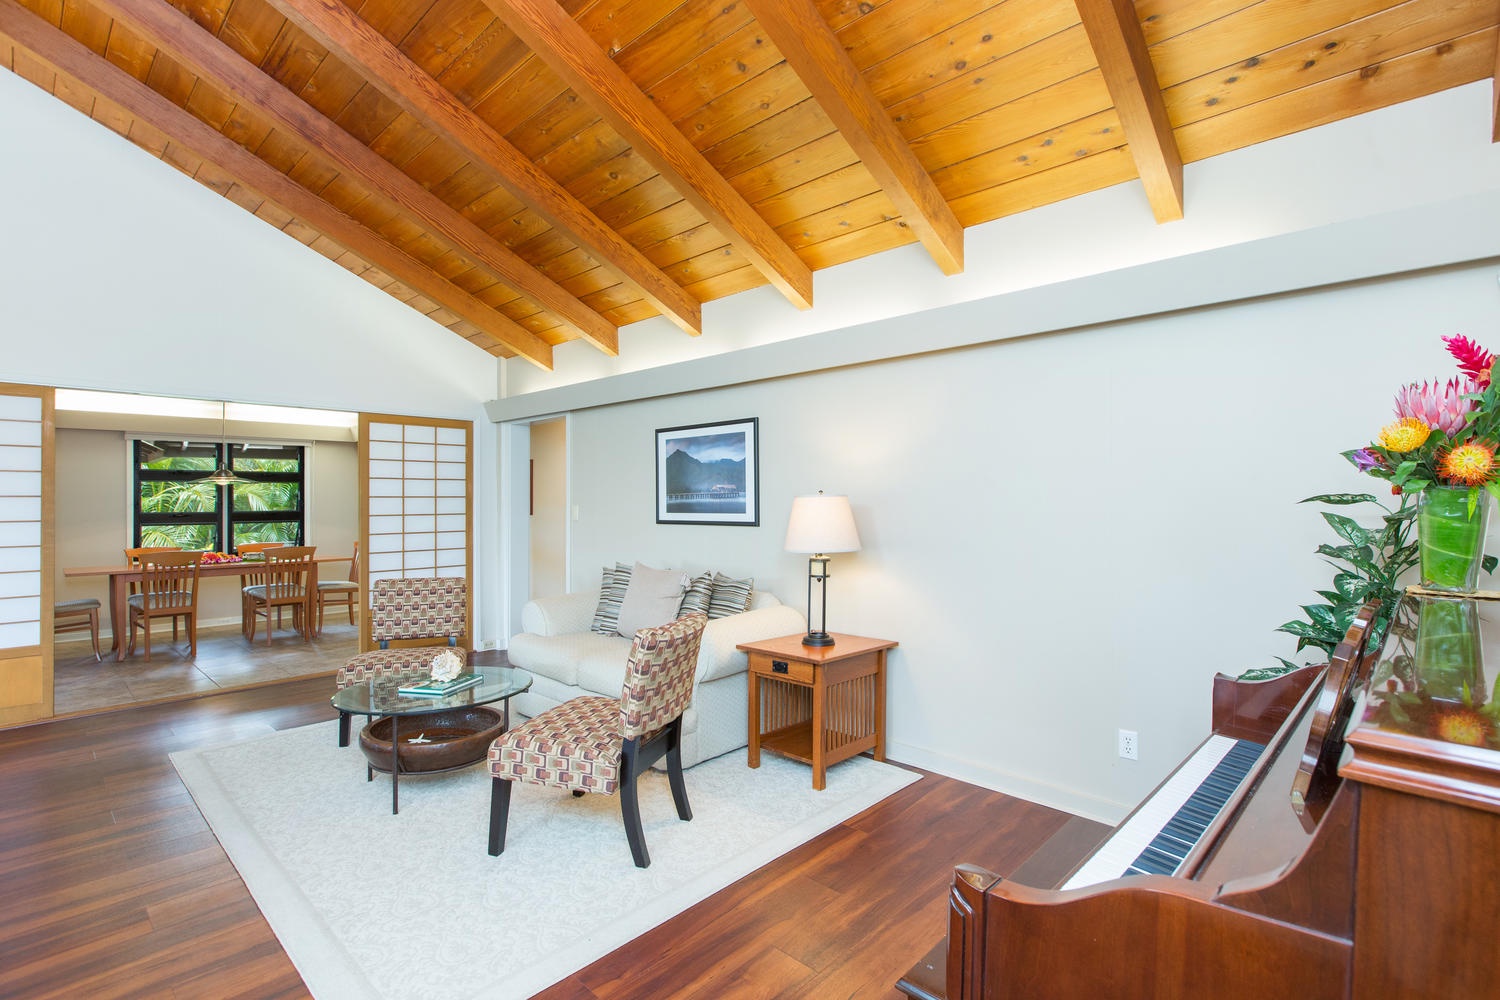 Honolulu Vacation Rentals, Hale Poola - Large open-concept living room with TV, in the far view is the dining room.